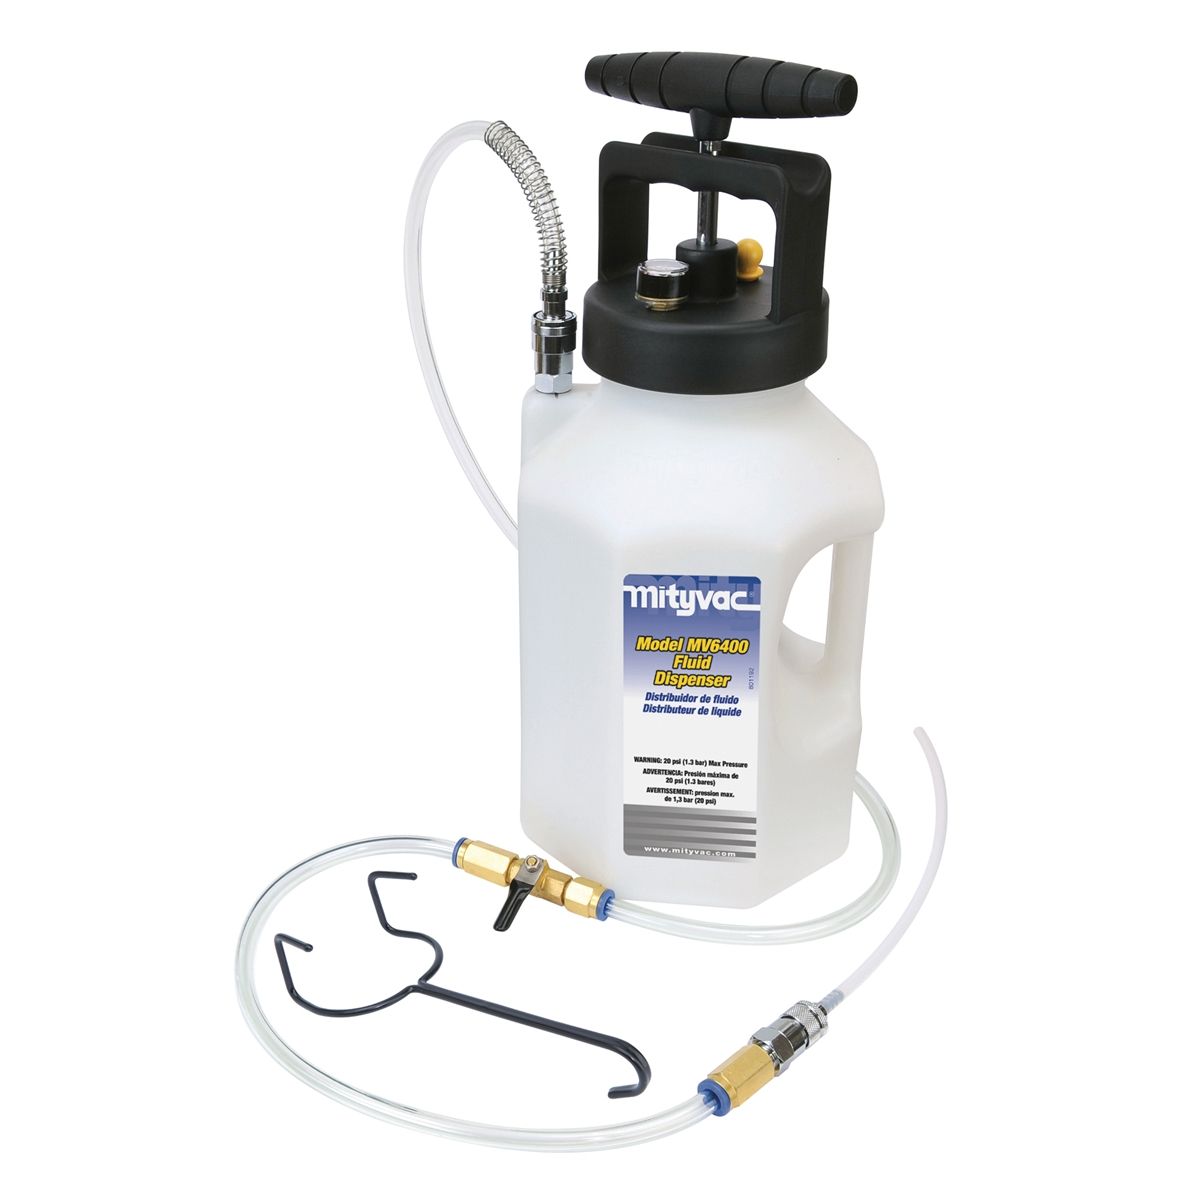 manual fluid extractor and dispenser